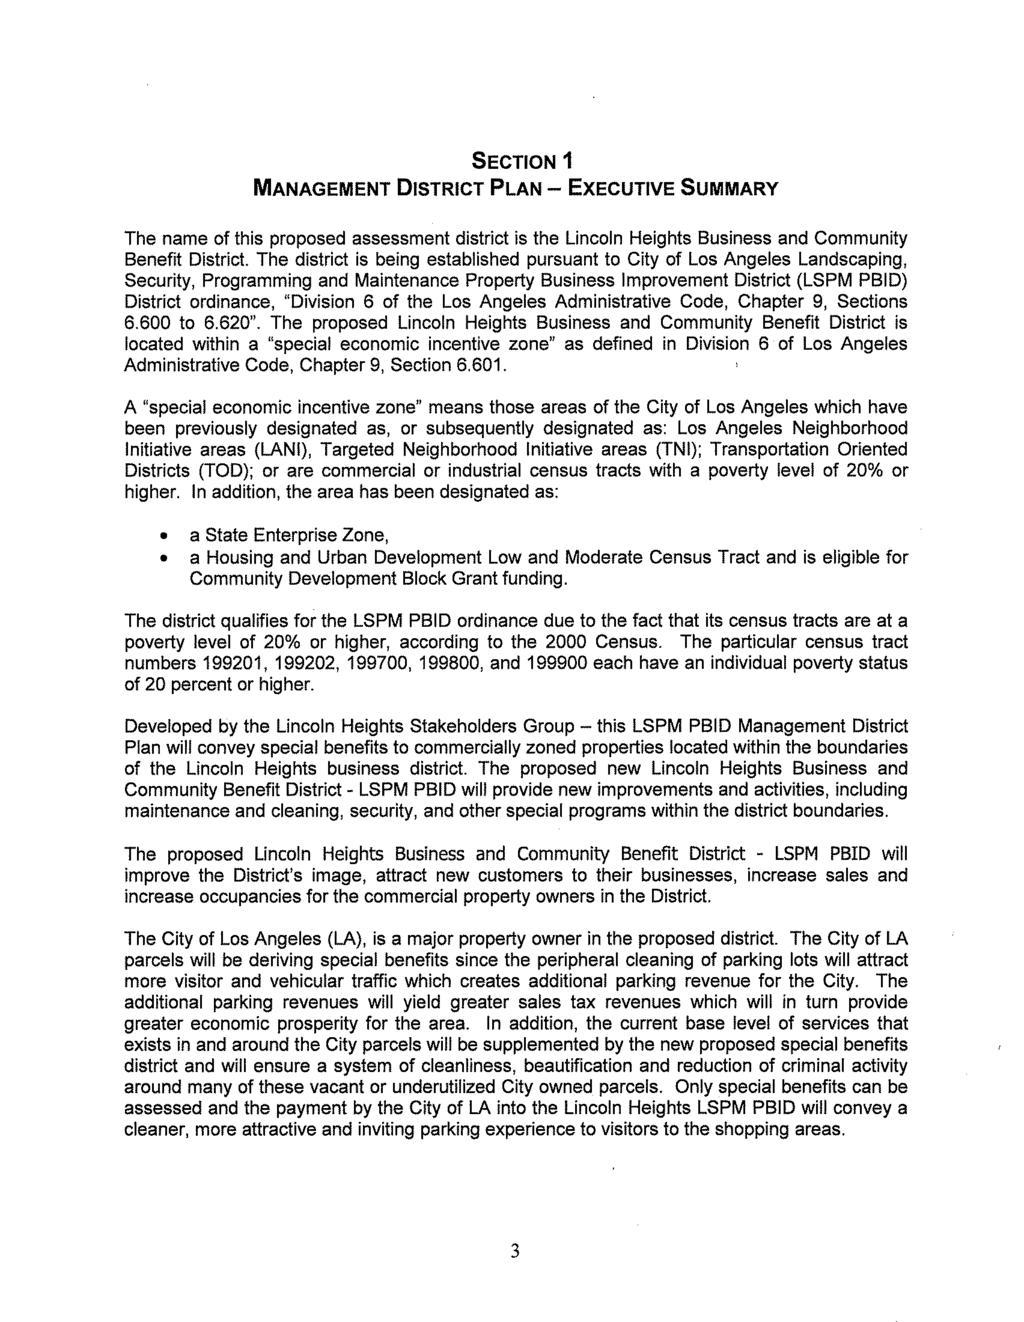 SECTION 1 MANAGEMENT DISTRICT PLAN - EXECUTIVE SUMMARY The name of this proposed assessment district is the Lincoln Heights Business and Community Benefit District.